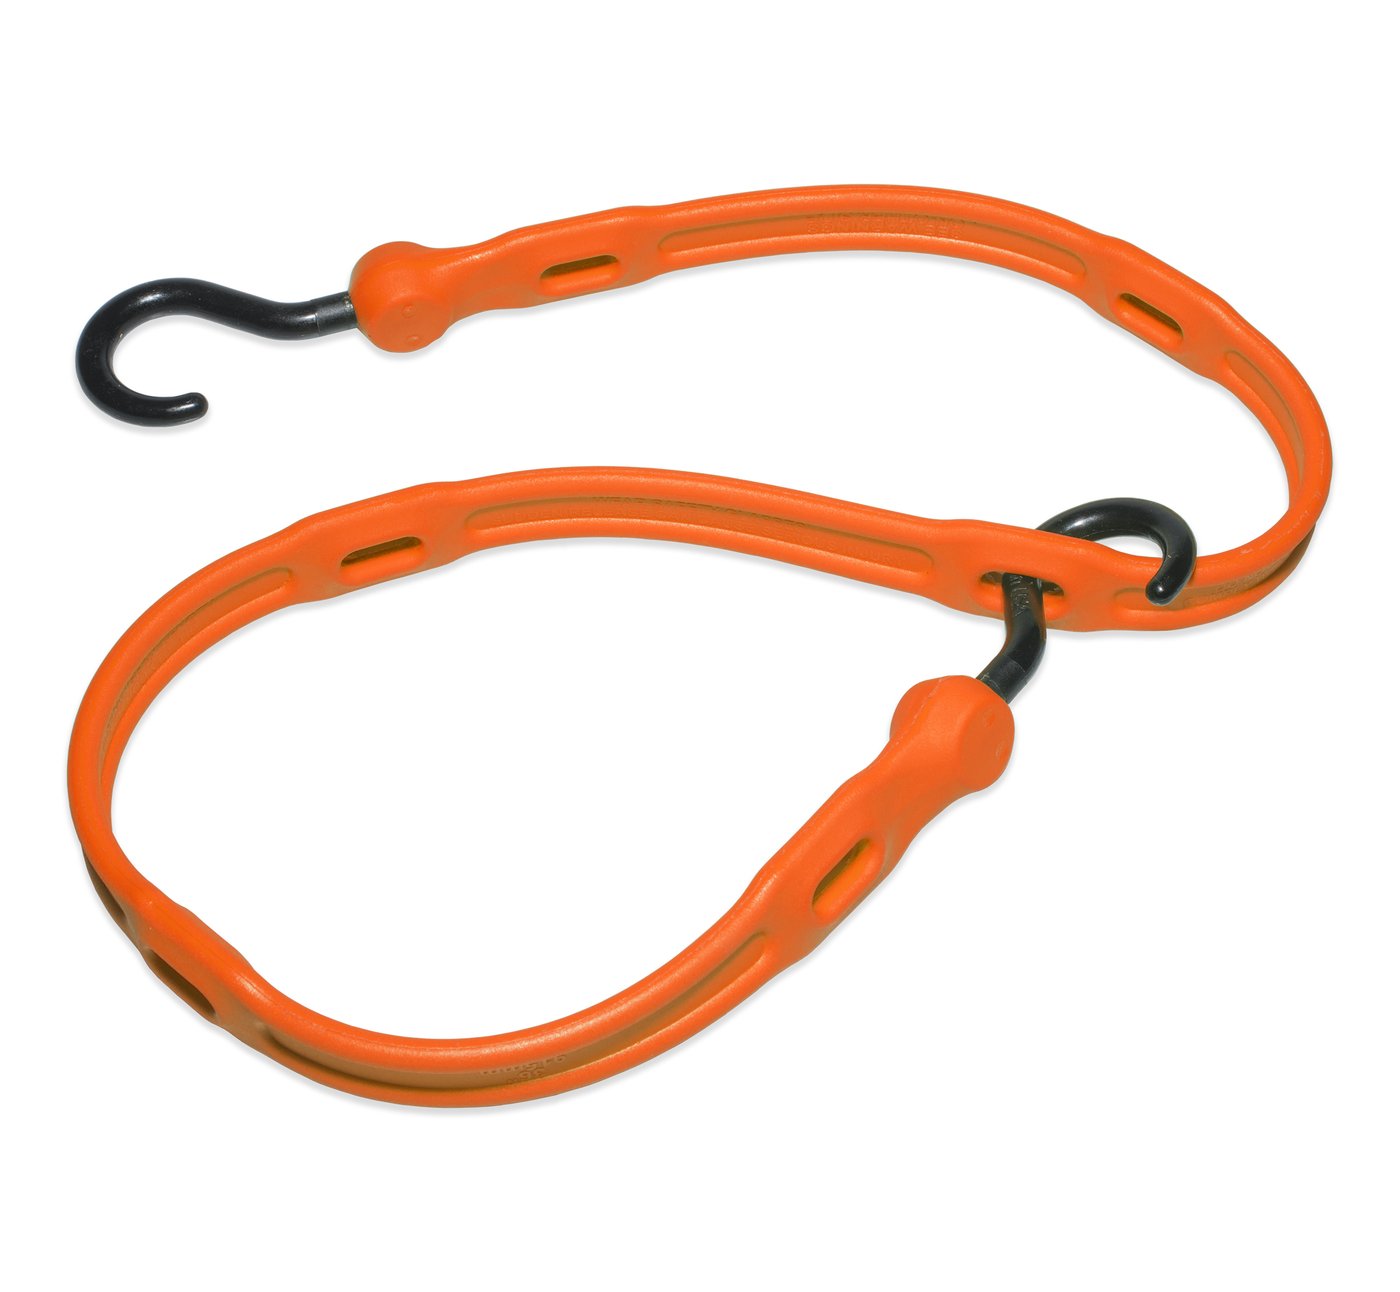 The Perfect Bungee 36 Adjust-A-Strap Adjustable Bungee Strap Orange